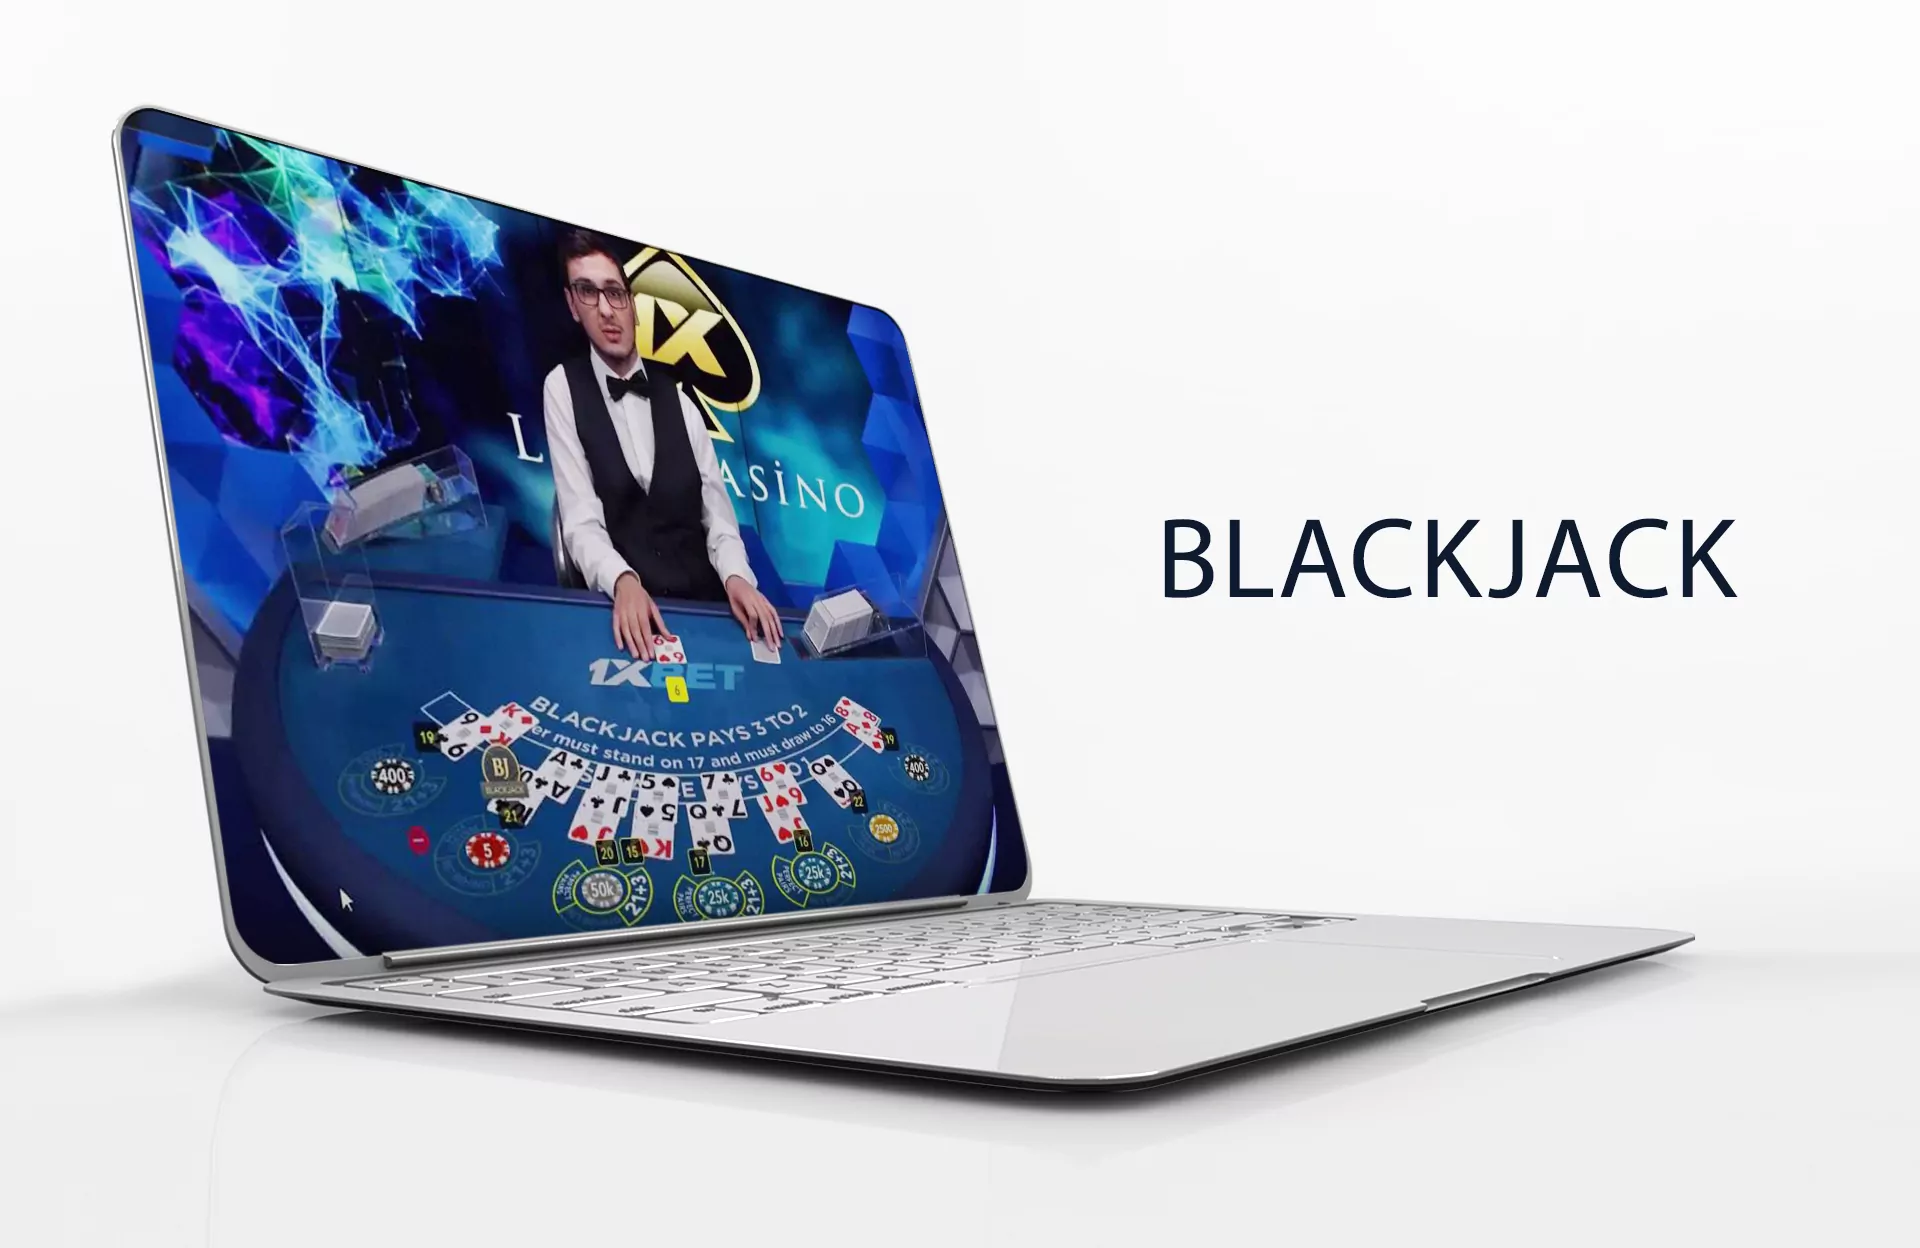 Online Blackjack is available at 1xBet in India.